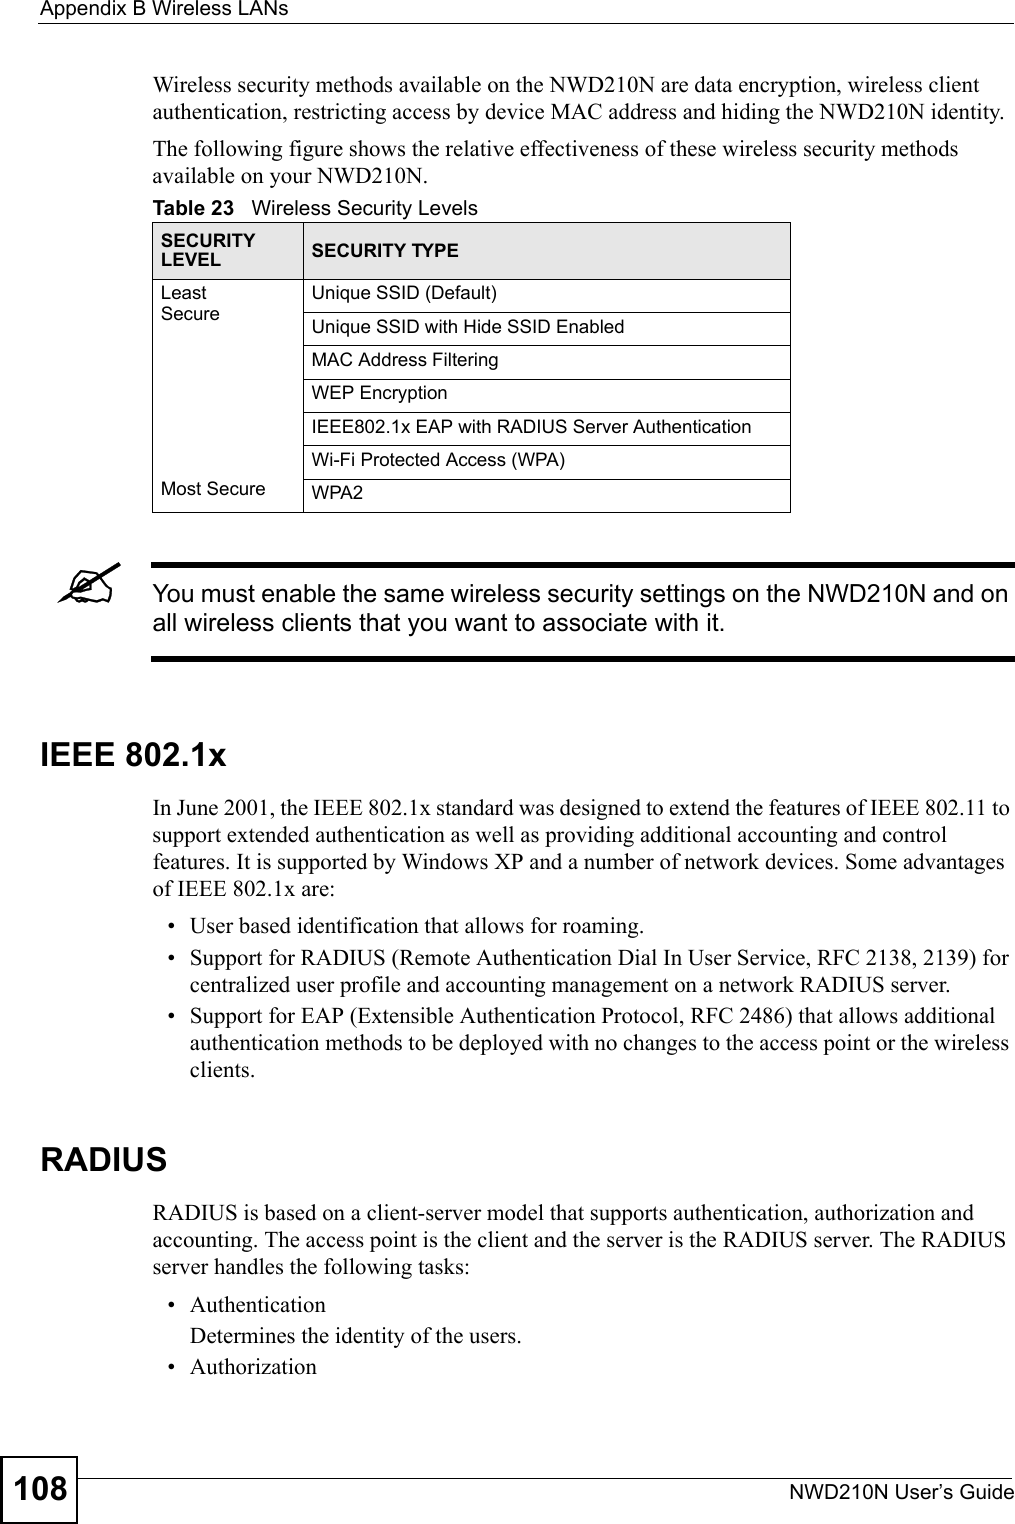 Appendix B Wireless LANsNWD210N User’s Guide108Wireless security methods available on the NWD210N are data encryption, wireless client authentication, restricting access by device MAC address and hiding the NWD210N identity.The following figure shows the relative effectiveness of these wireless security methods available on your NWD210N.&quot;You must enable the same wireless security settings on the NWD210N and on all wireless clients that you want to associate with it. IEEE 802.1xIn June 2001, the IEEE 802.1x standard was designed to extend the features of IEEE 802.11 to support extended authentication as well as providing additional accounting and control features. It is supported by Windows XP and a number of network devices. Some advantages of IEEE 802.1x are:• User based identification that allows for roaming.• Support for RADIUS (Remote Authentication Dial In User Service, RFC 2138, 2139) for centralized user profile and accounting management on a network RADIUS server. • Support for EAP (Extensible Authentication Protocol, RFC 2486) that allows additional authentication methods to be deployed with no changes to the access point or the wireless clients. RADIUSRADIUS is based on a client-server model that supports authentication, authorization and accounting. The access point is the client and the server is the RADIUS server. The RADIUS server handles the following tasks:• Authentication Determines the identity of the users.• AuthorizationTable 23   Wireless Security LevelsSECURITY LEVEL SECURITY TYPELeast       S e c u r e                                                                                      Most SecureUnique SSID (Default)Unique SSID with Hide SSID EnabledMAC Address FilteringWEP EncryptionIEEE802.1x EAP with RADIUS Server AuthenticationWi-Fi Protected Access (WPA)WPA2